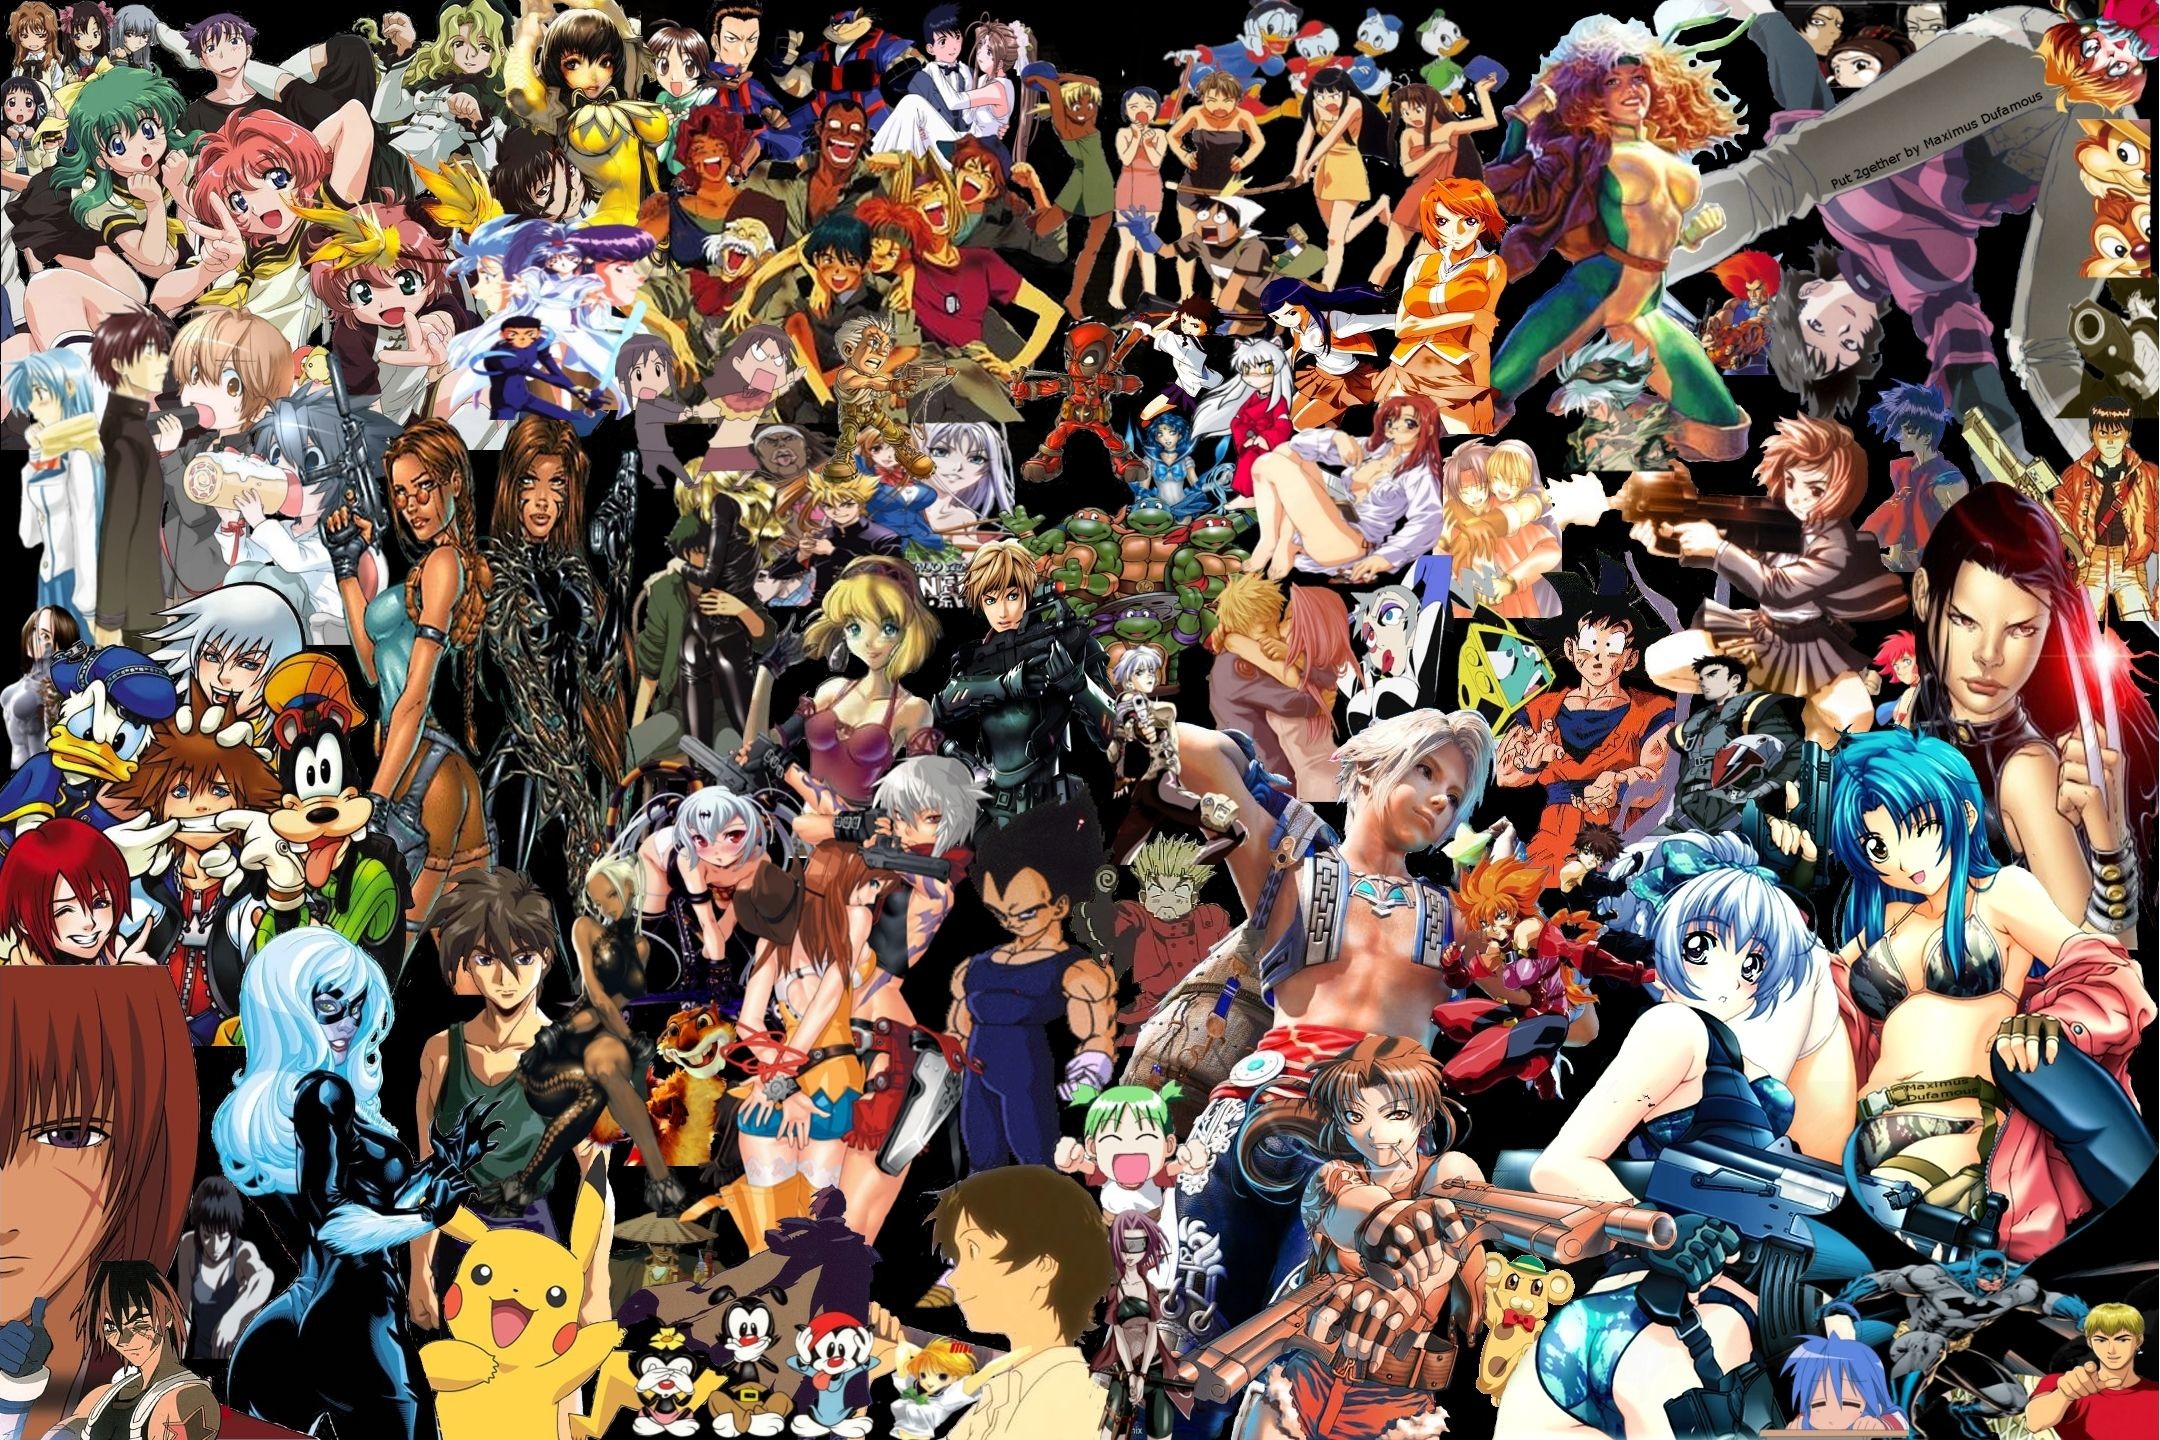 Anime Collage HD Desktop Backgrounds 14305 – HD Wallpapers Site